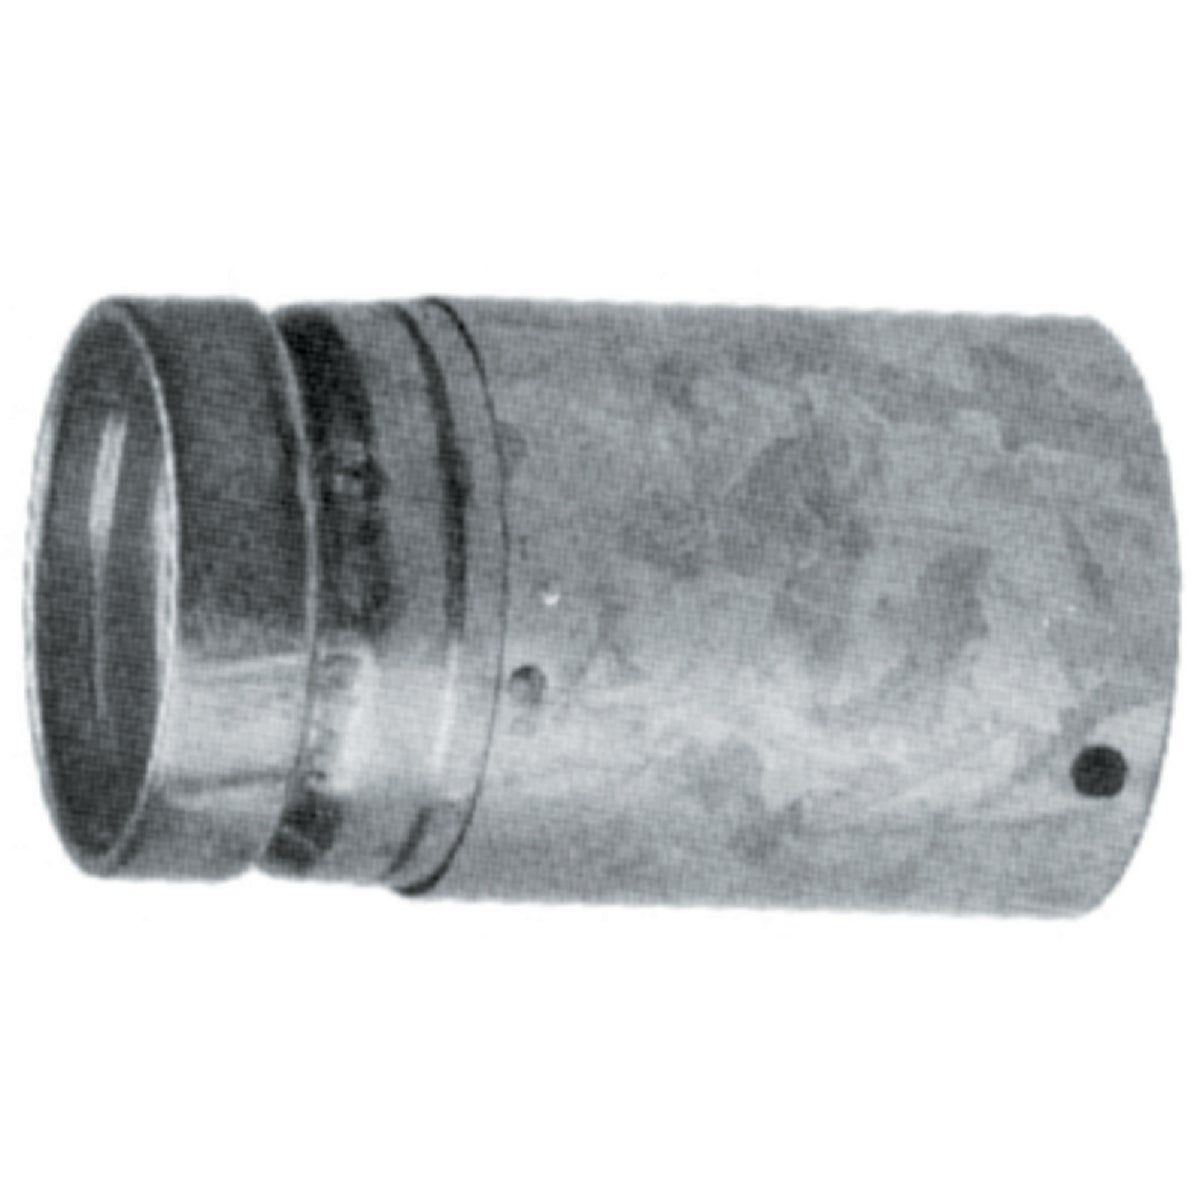 SELKIRK RV 4 In. x 12 In. Adjustable Round Gas Vent Pipe